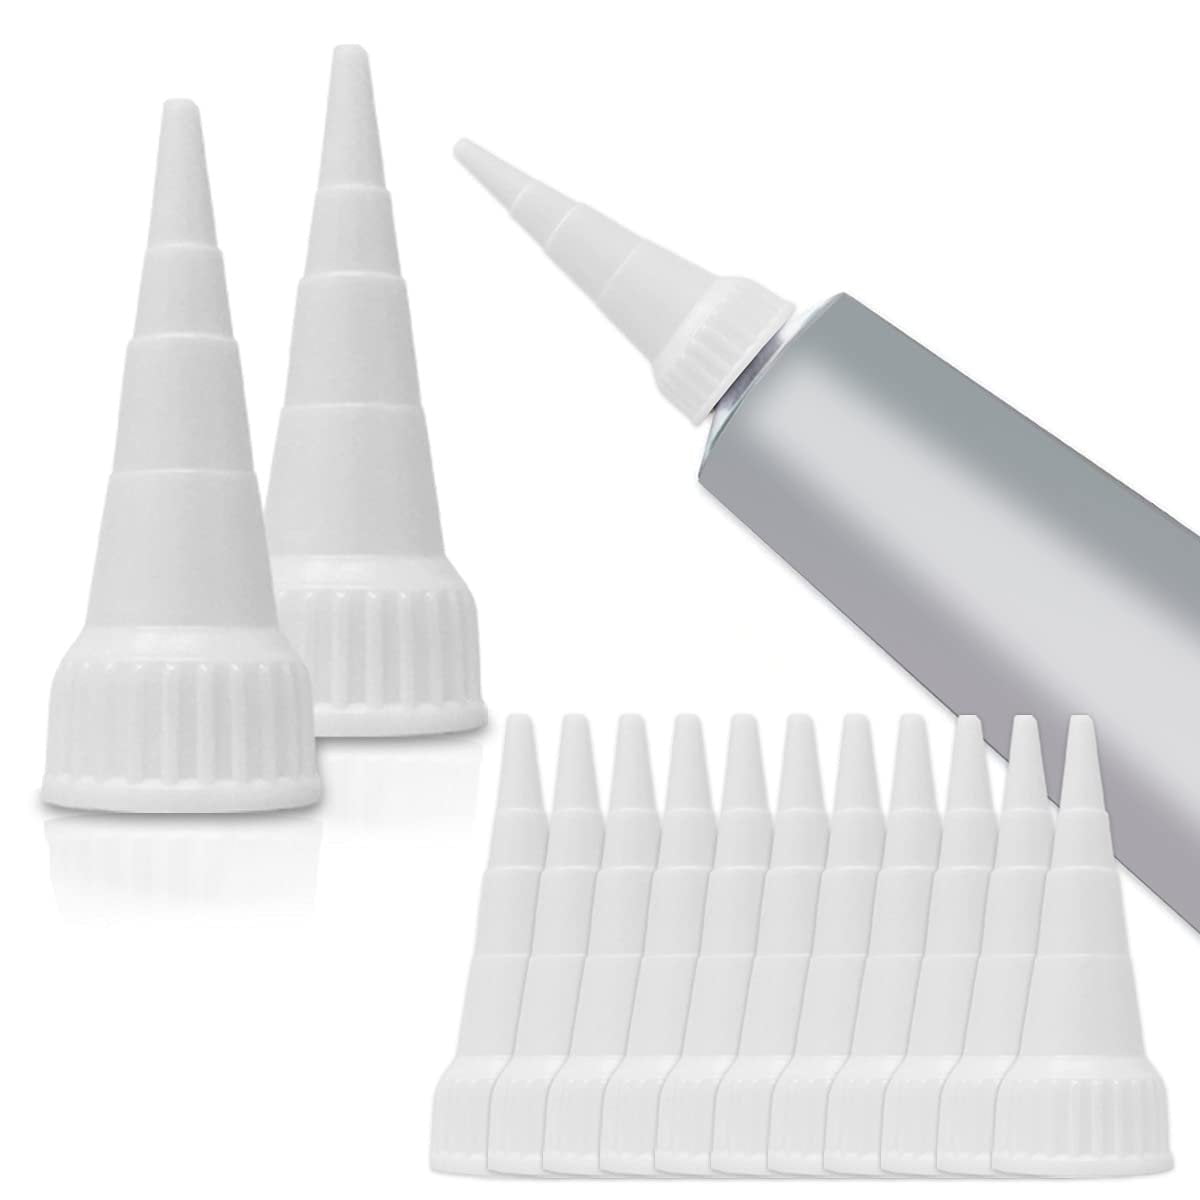 1 oz Bellows Type Glue Applicator Set of 2, apply small amounts of glue for  precise application and easy control of glue flow